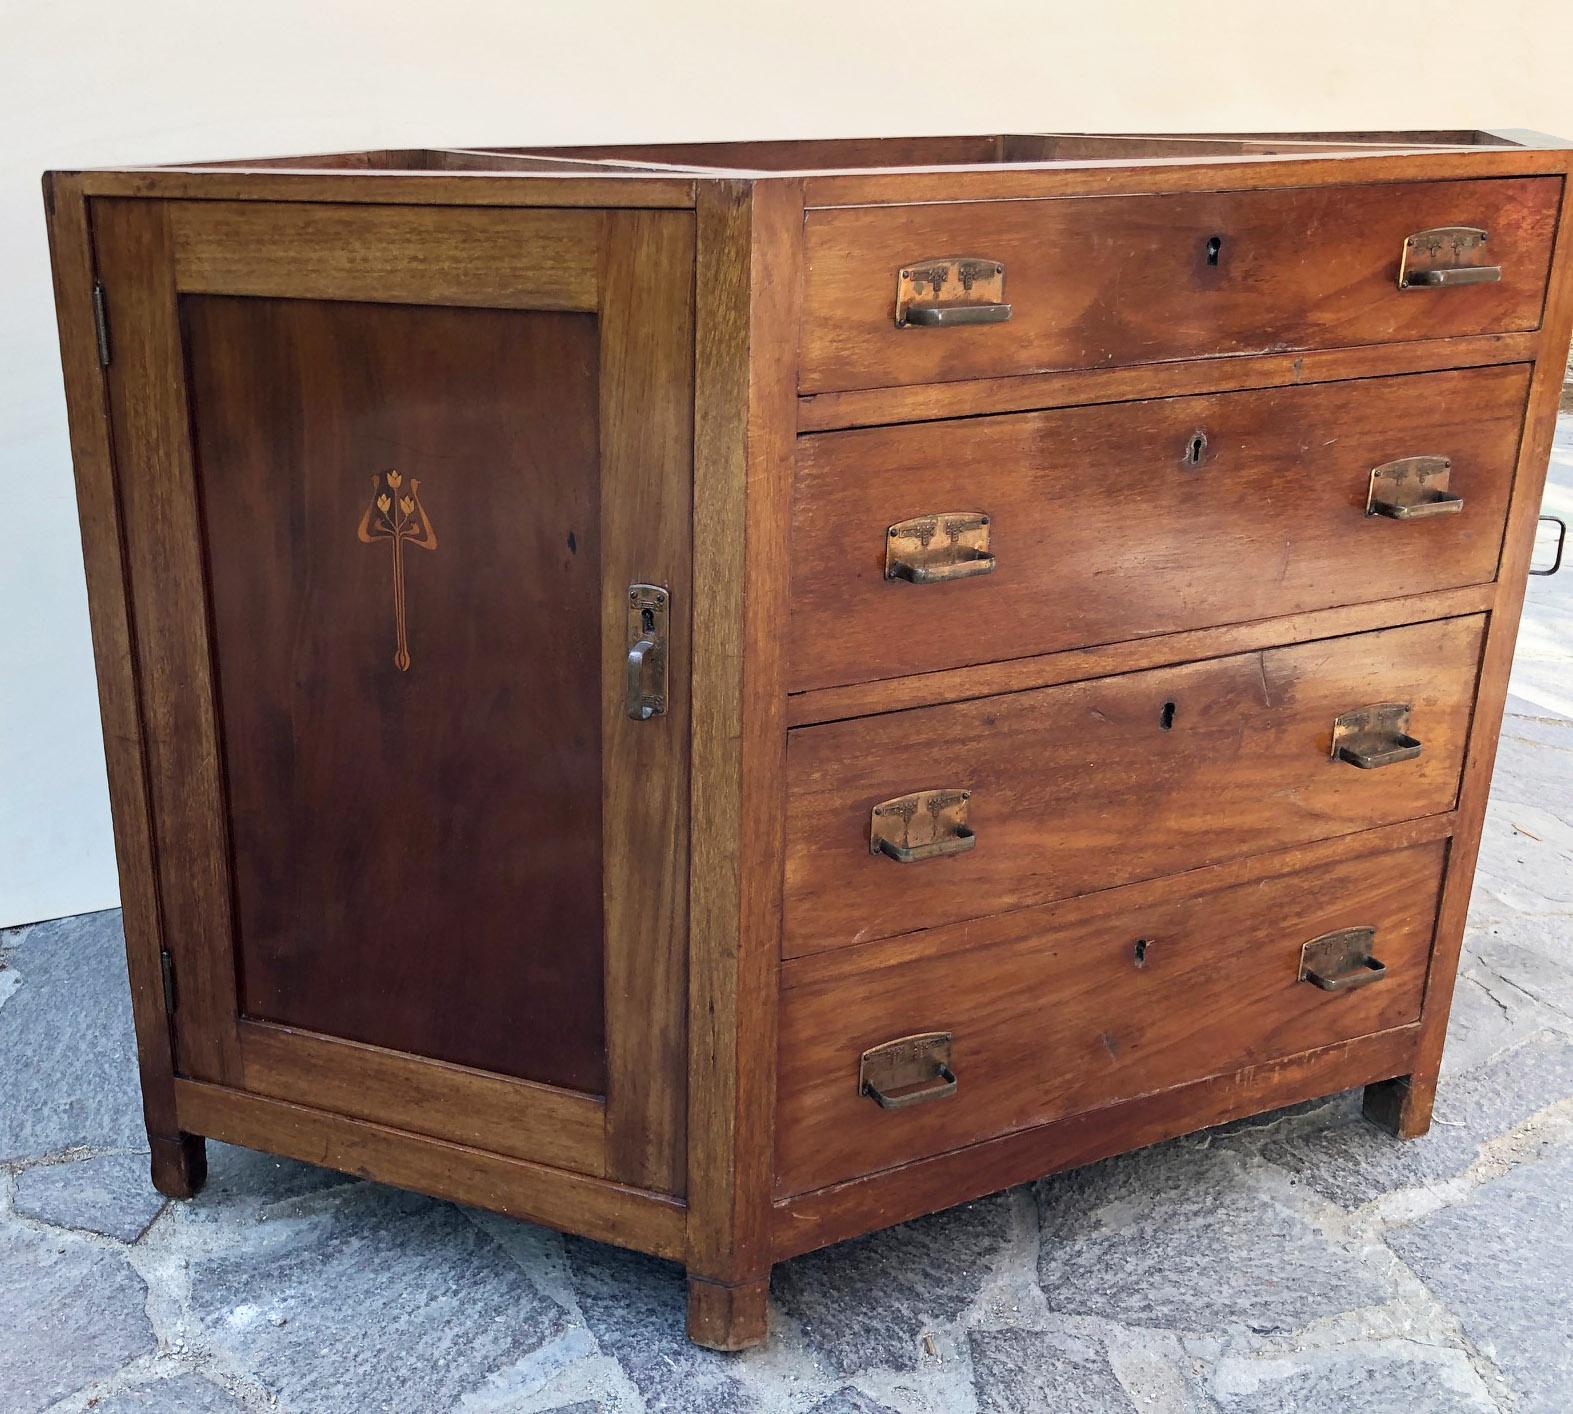 Italian Art Nouveau sideboard, in original solid oak from 1910.
Original brass handles, very rare hexagonal shape, with marble top and four drawers.
Coming from an ancient sea villa in Livorno, Tuscany.
In this piece of furniture you can only